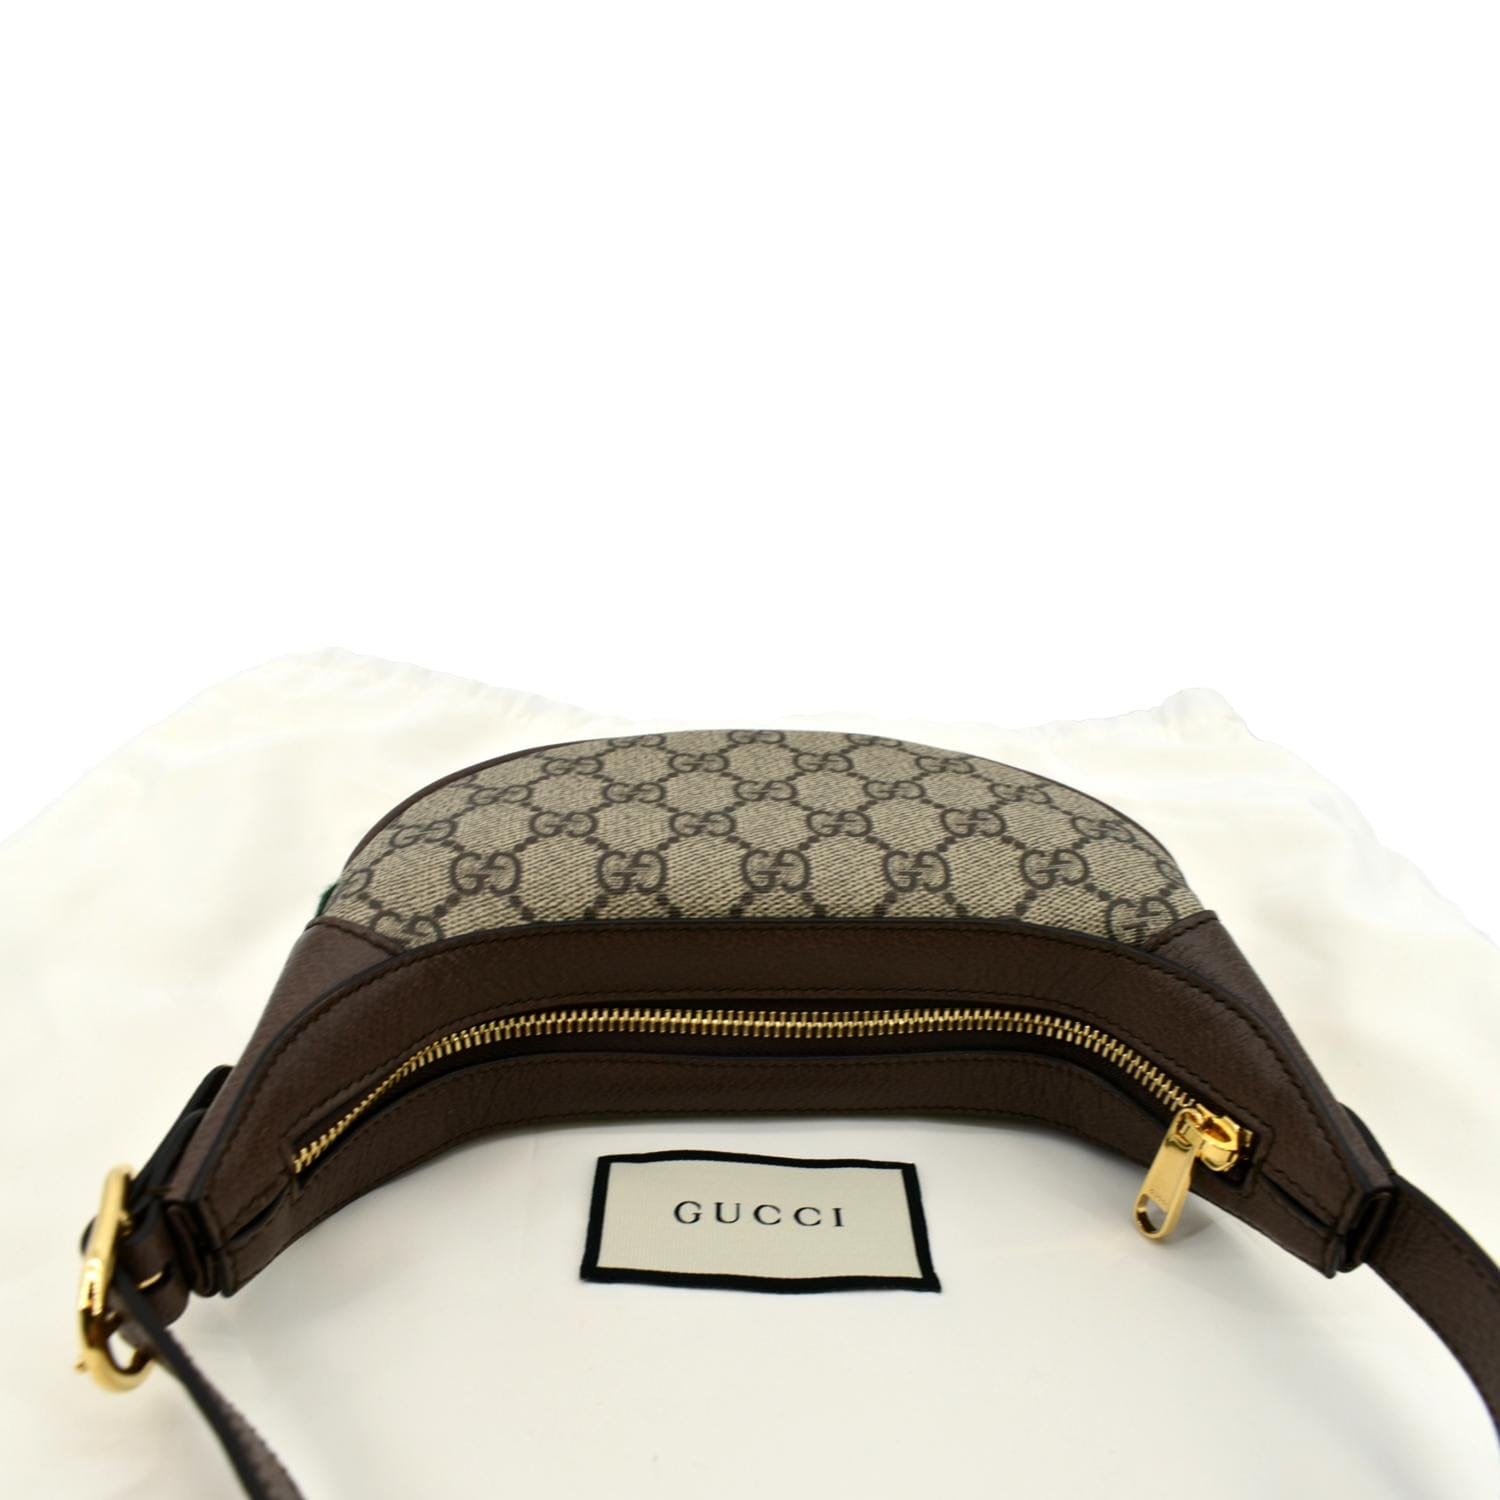 Gucci Ophidia small top handle bag Beige and ebony GG Supreme canvas